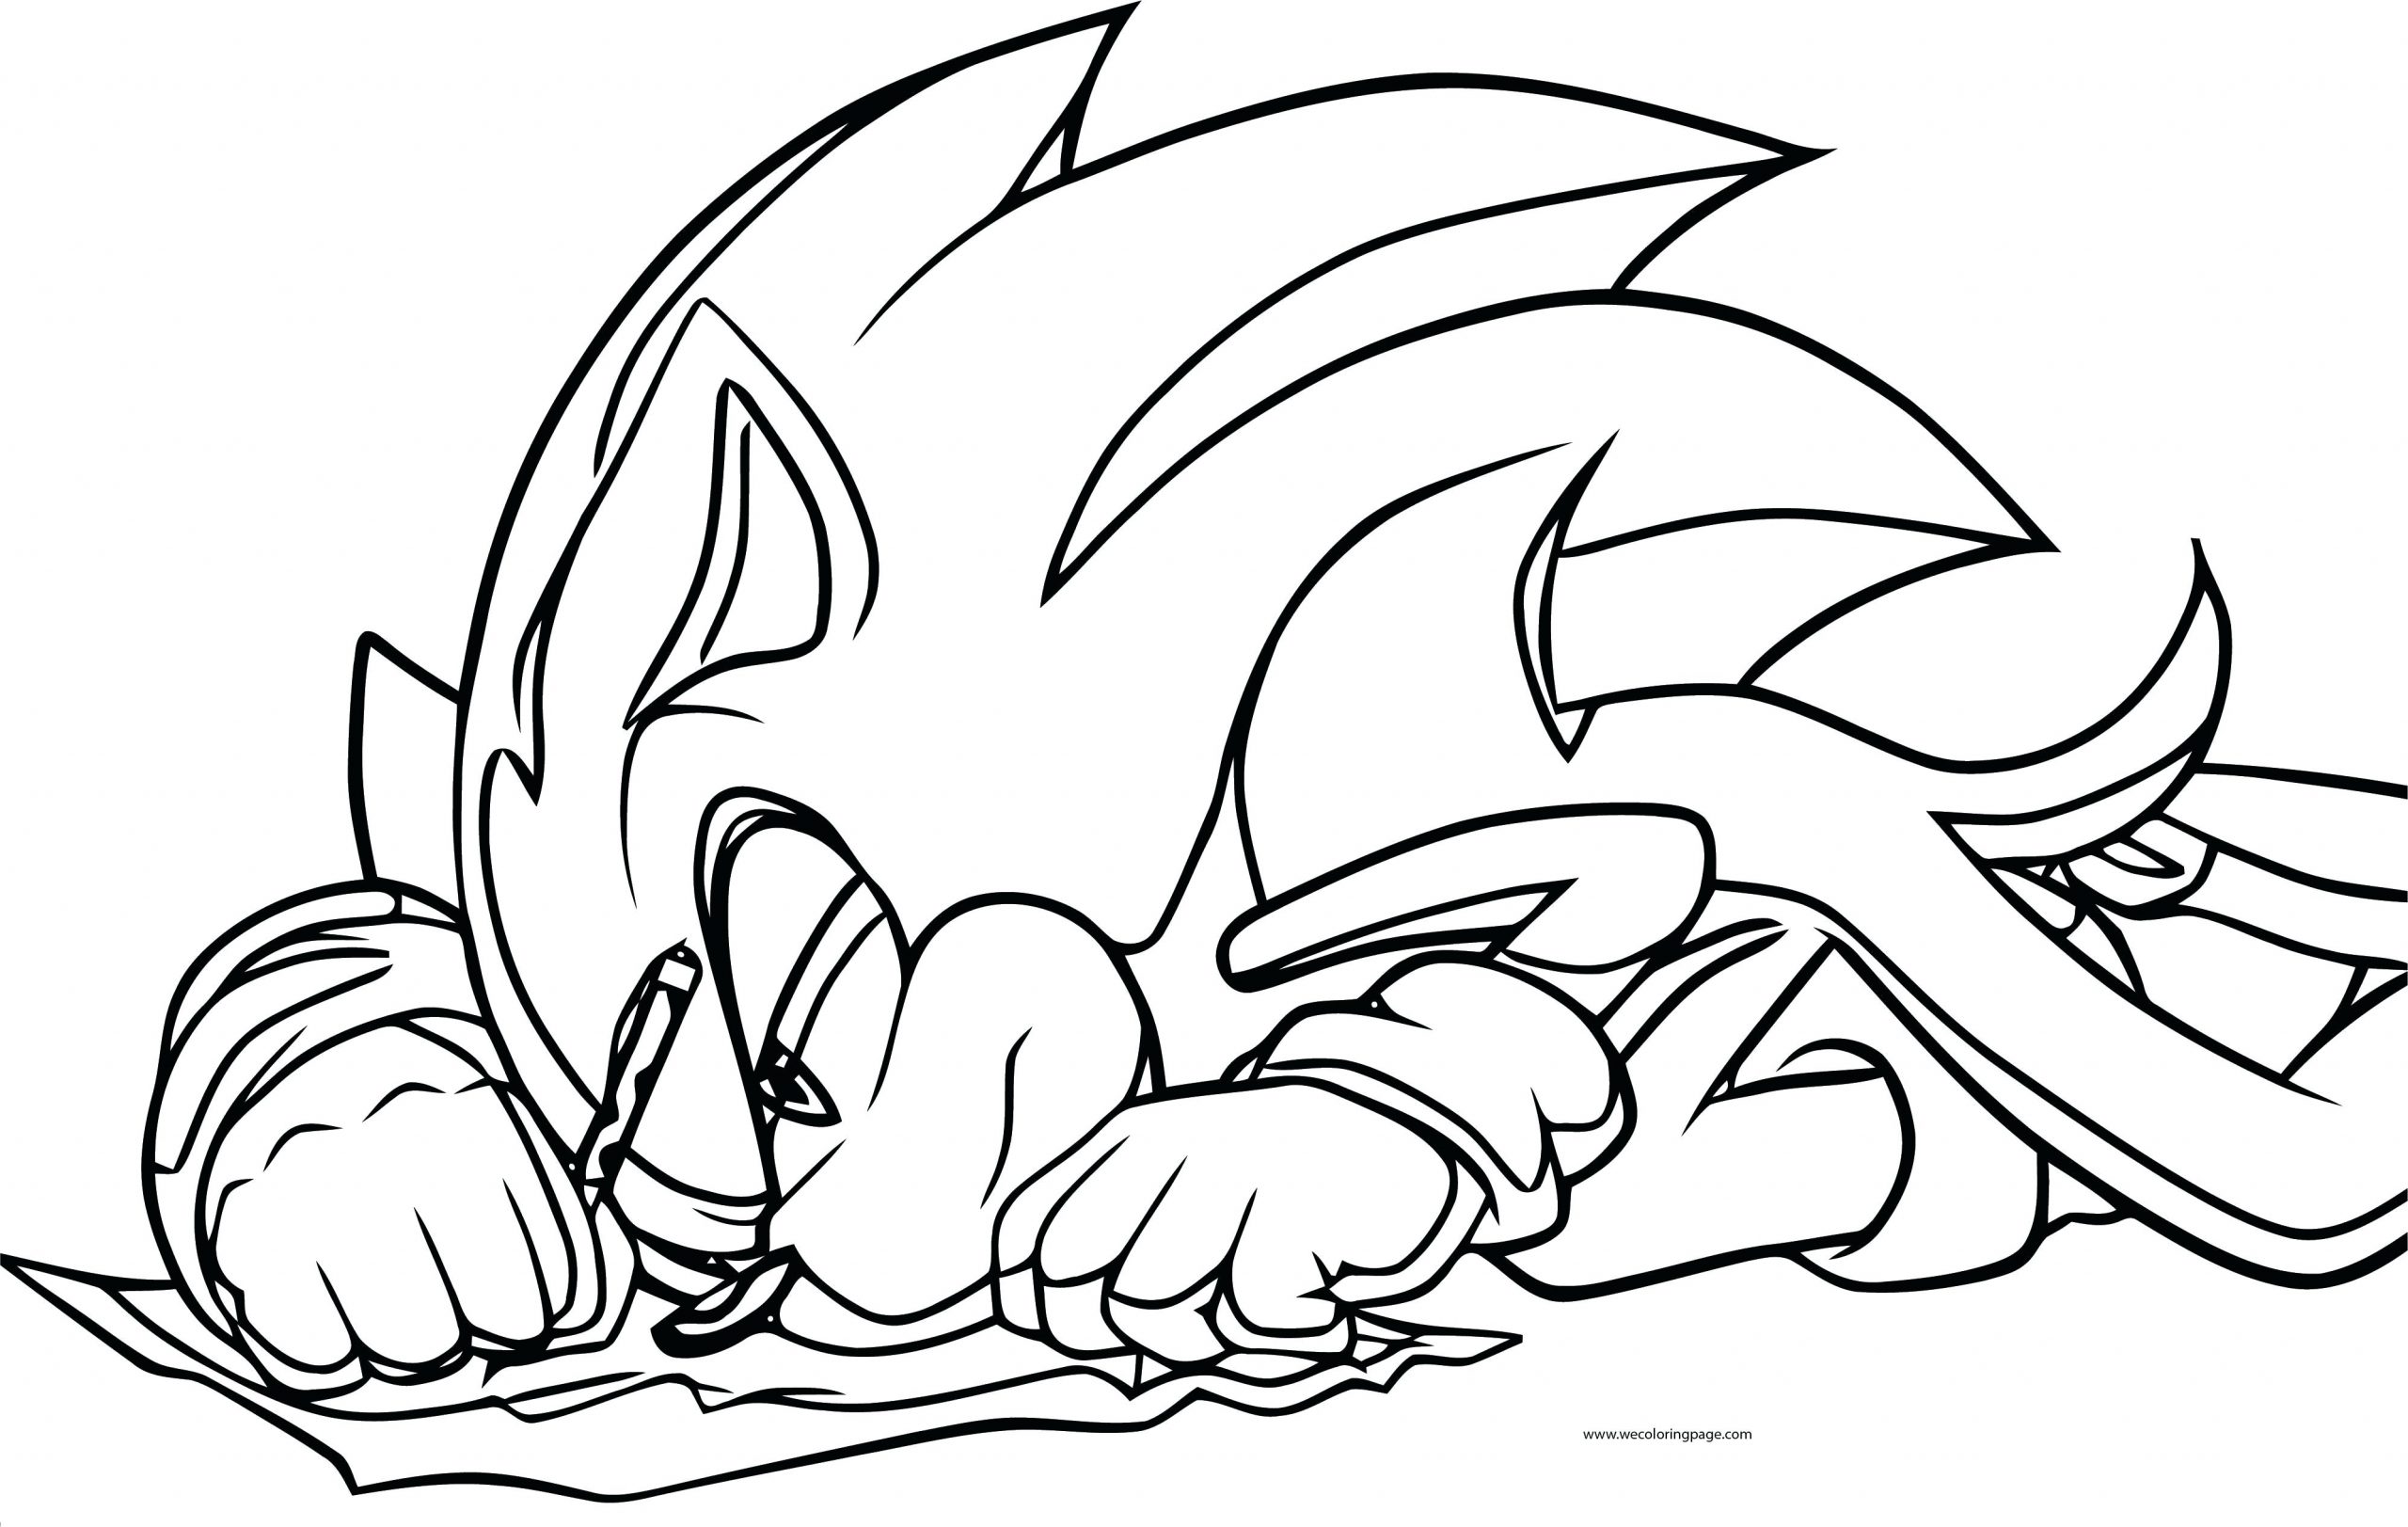 Coloring Book ~ Sonic The Hedgehog Coloring Pages Pdf Printable ...